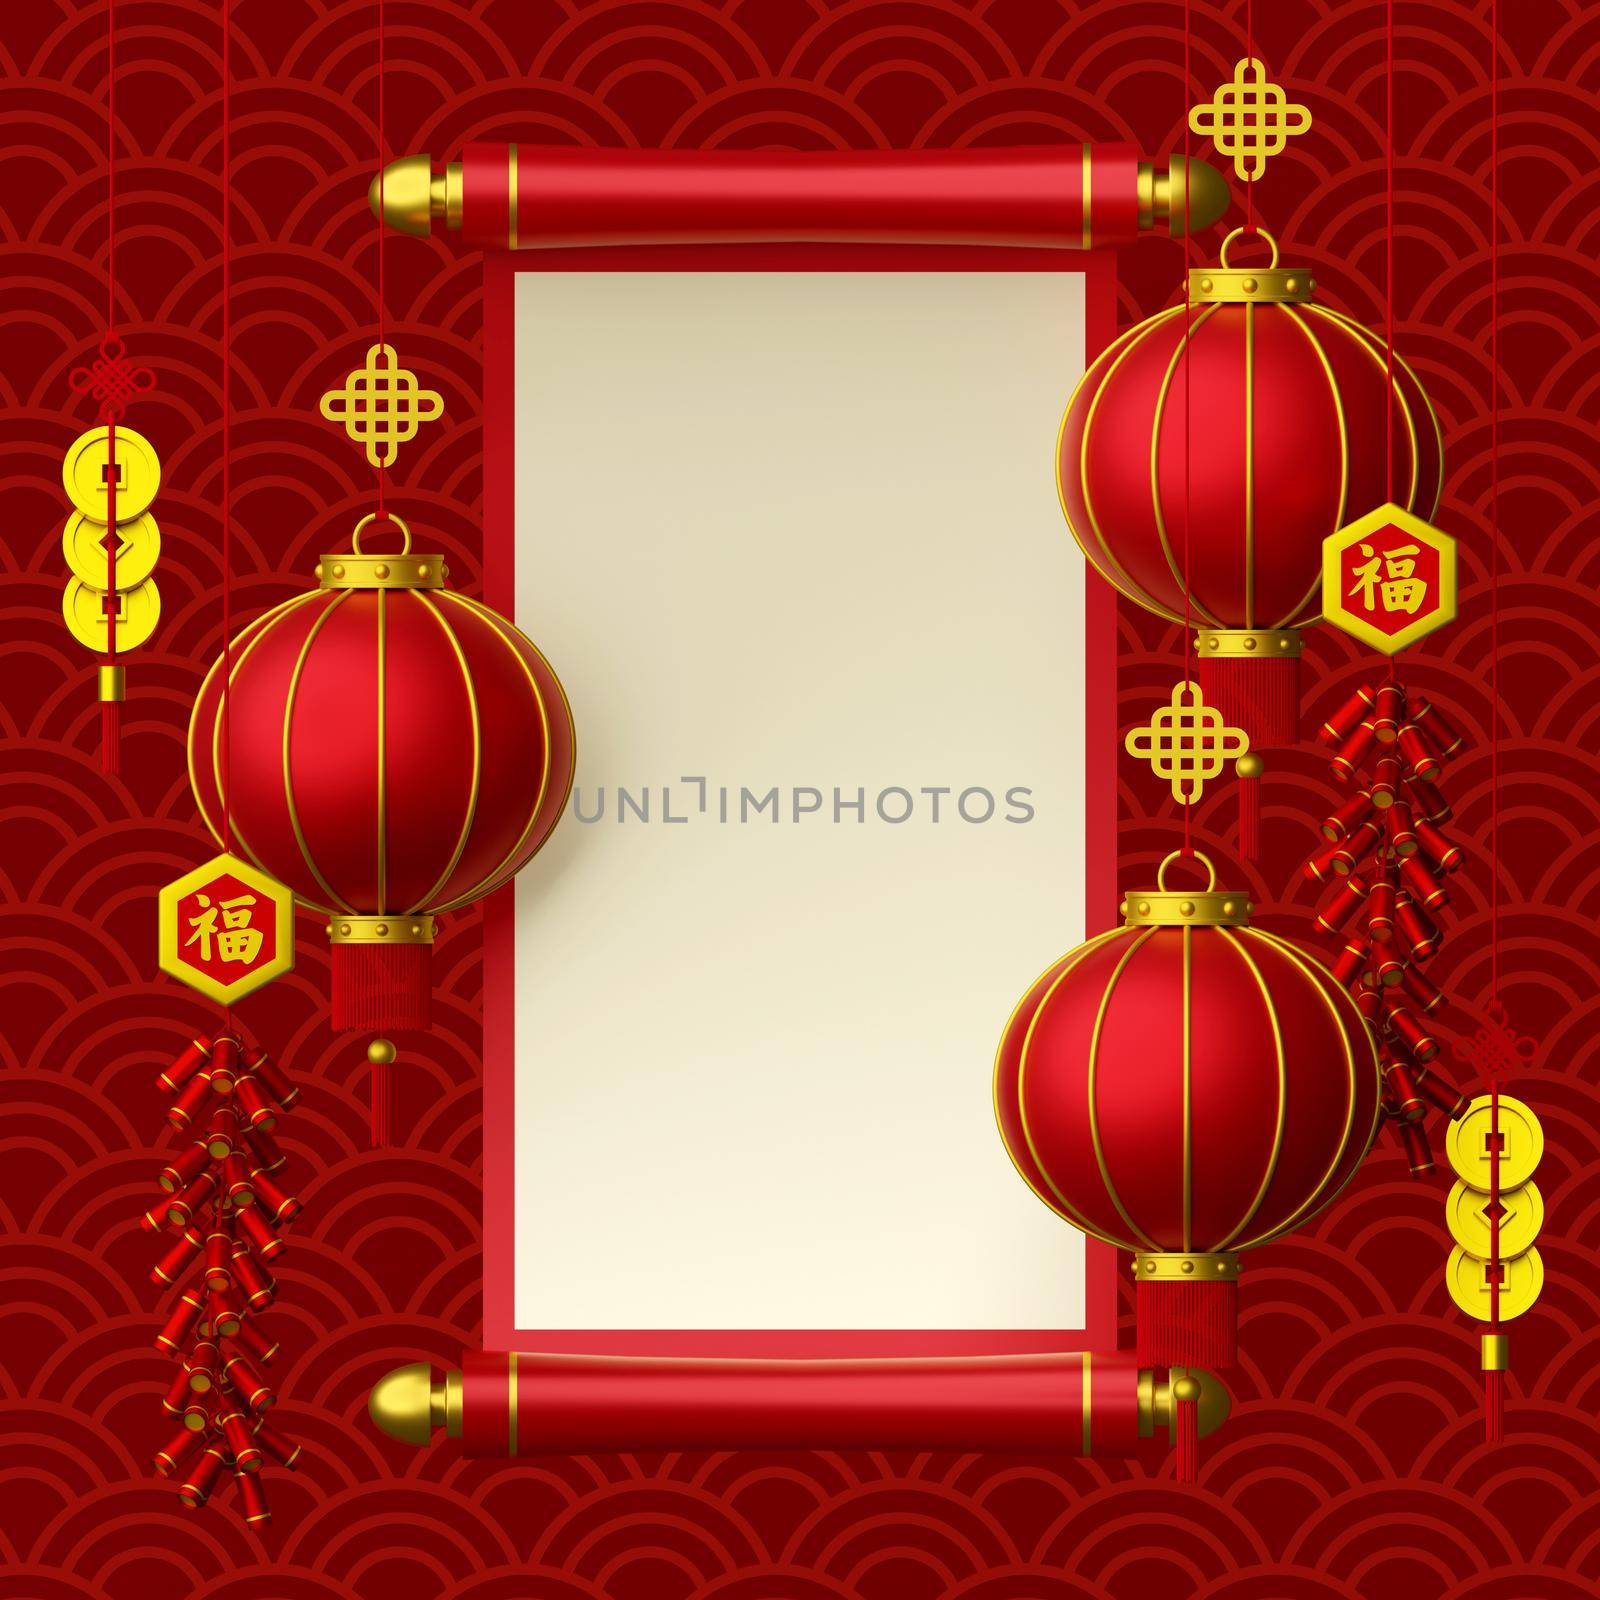 3d illustration of Chinese new year banner with Chinese scripture, hanging lantern, cracker and coin